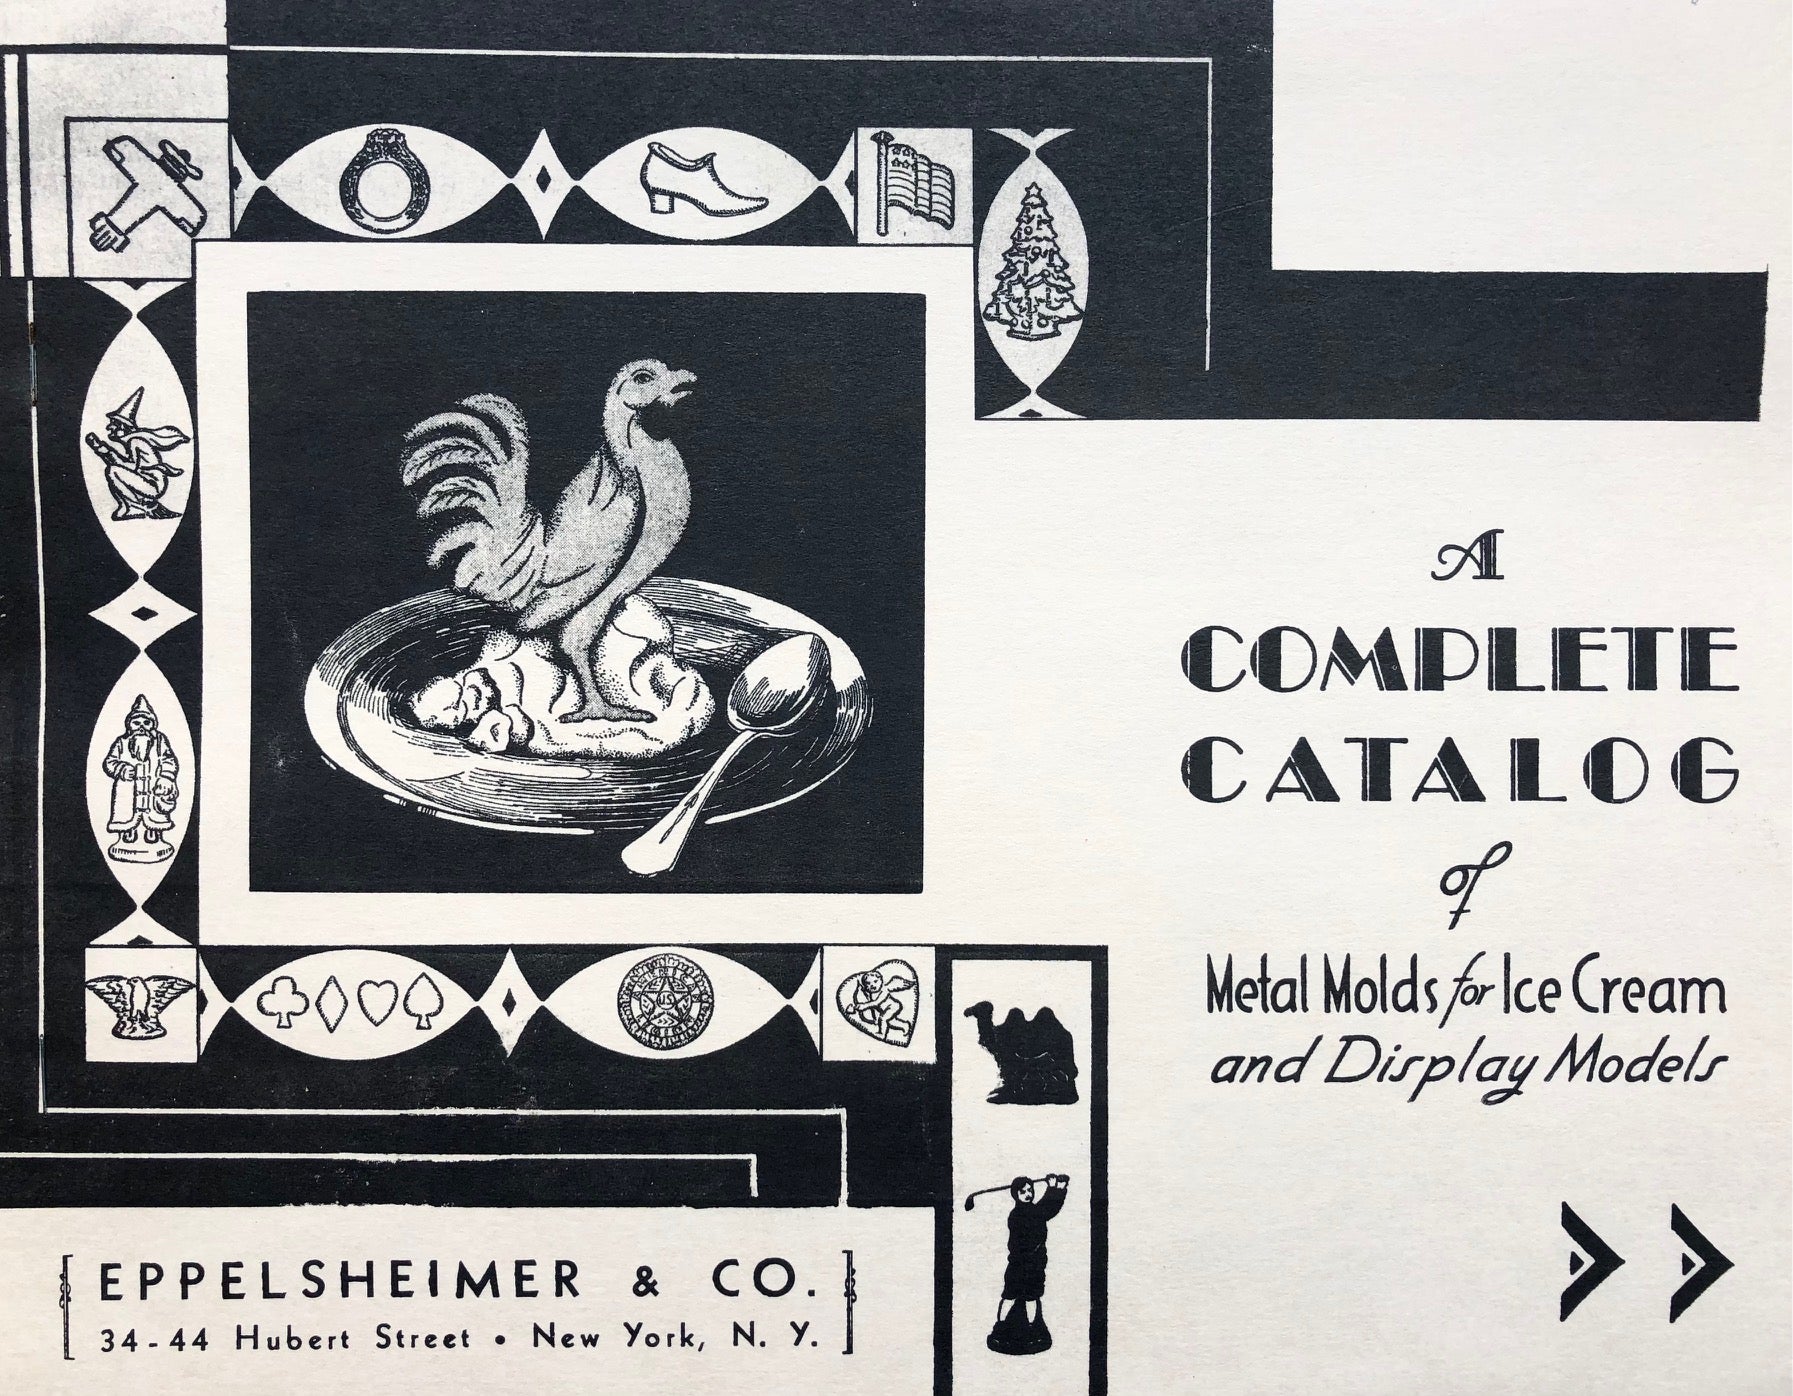 (Ice Cream) Eppelsheimer & Co. A Complete Catalog of Metal Moulds for Ice Cream and Display Models.